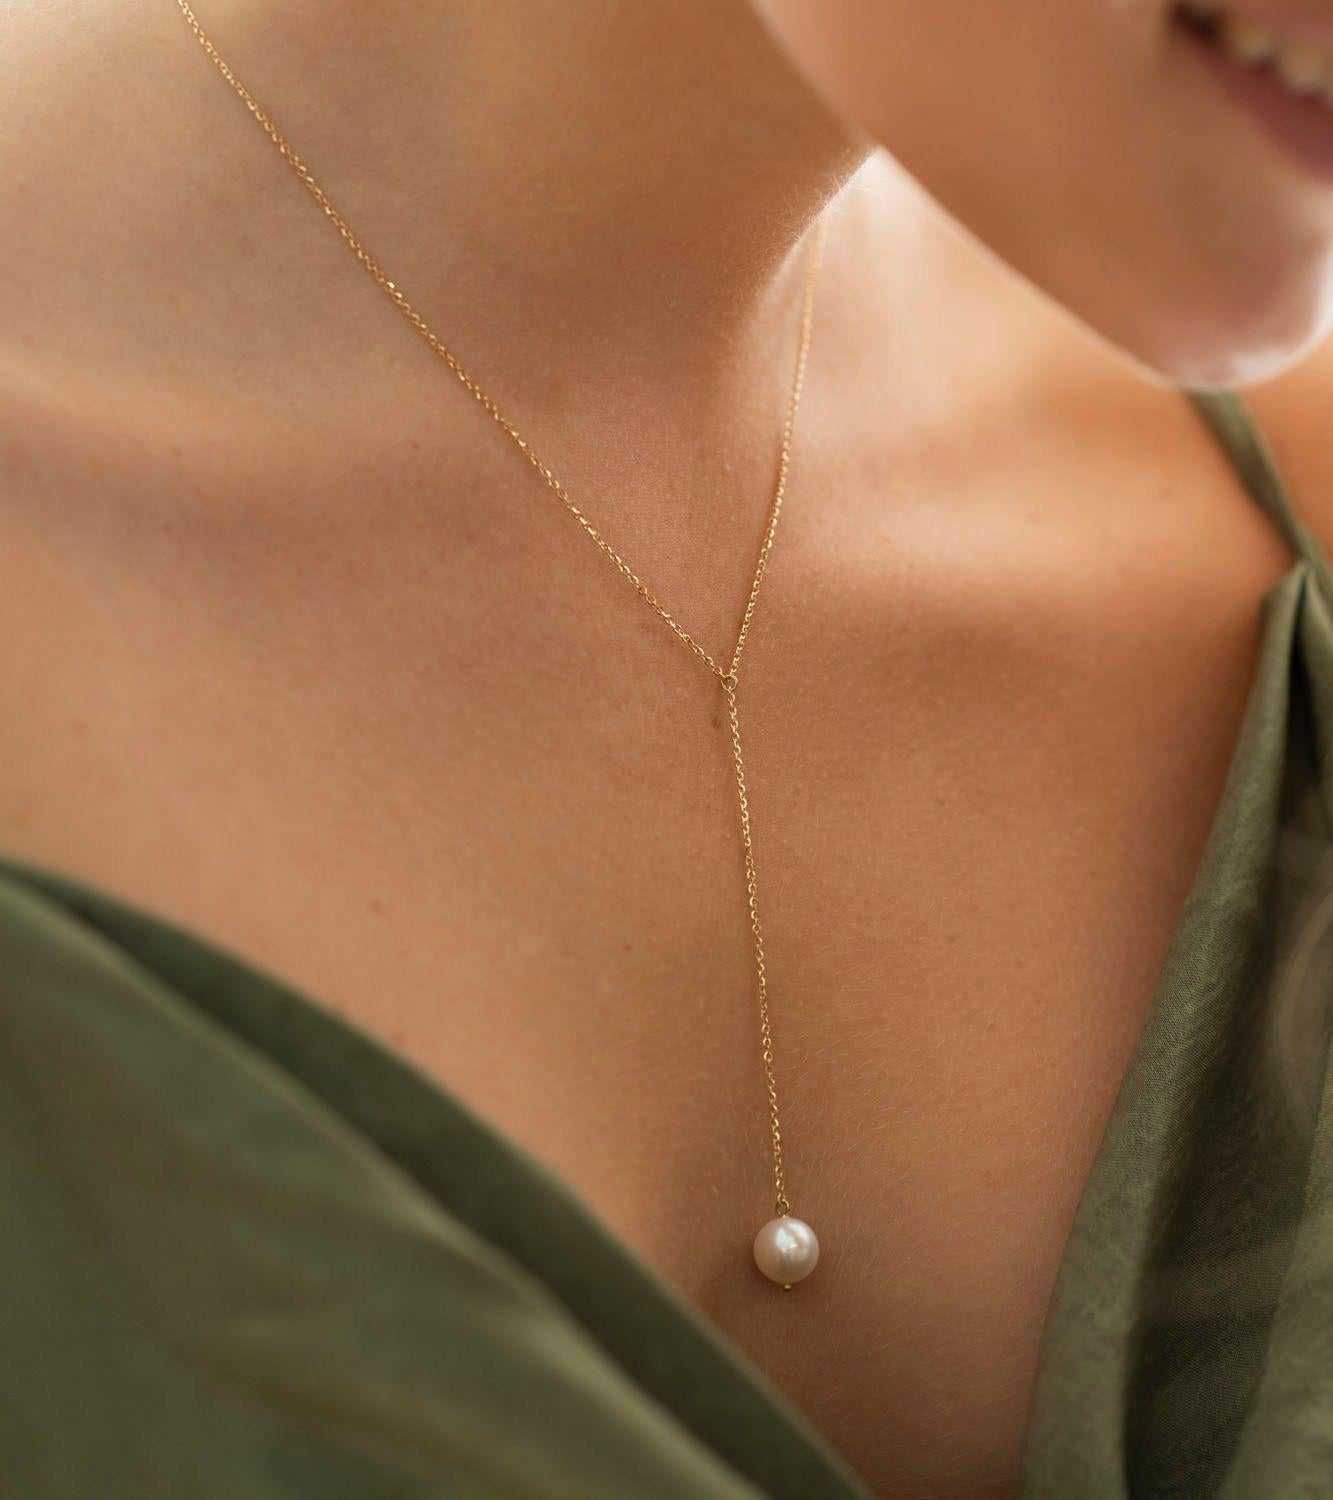 The Pearl Lariat necklace features a lustrous pearl suspended from a delicate and sparkly chain.
18 Karat Yellow Gold
Freshwater pearl, 9mm-10mm
40cm/14.75in chain with 8cm/3.15 drop (including pearl)
Please allow up to 10 working days for production